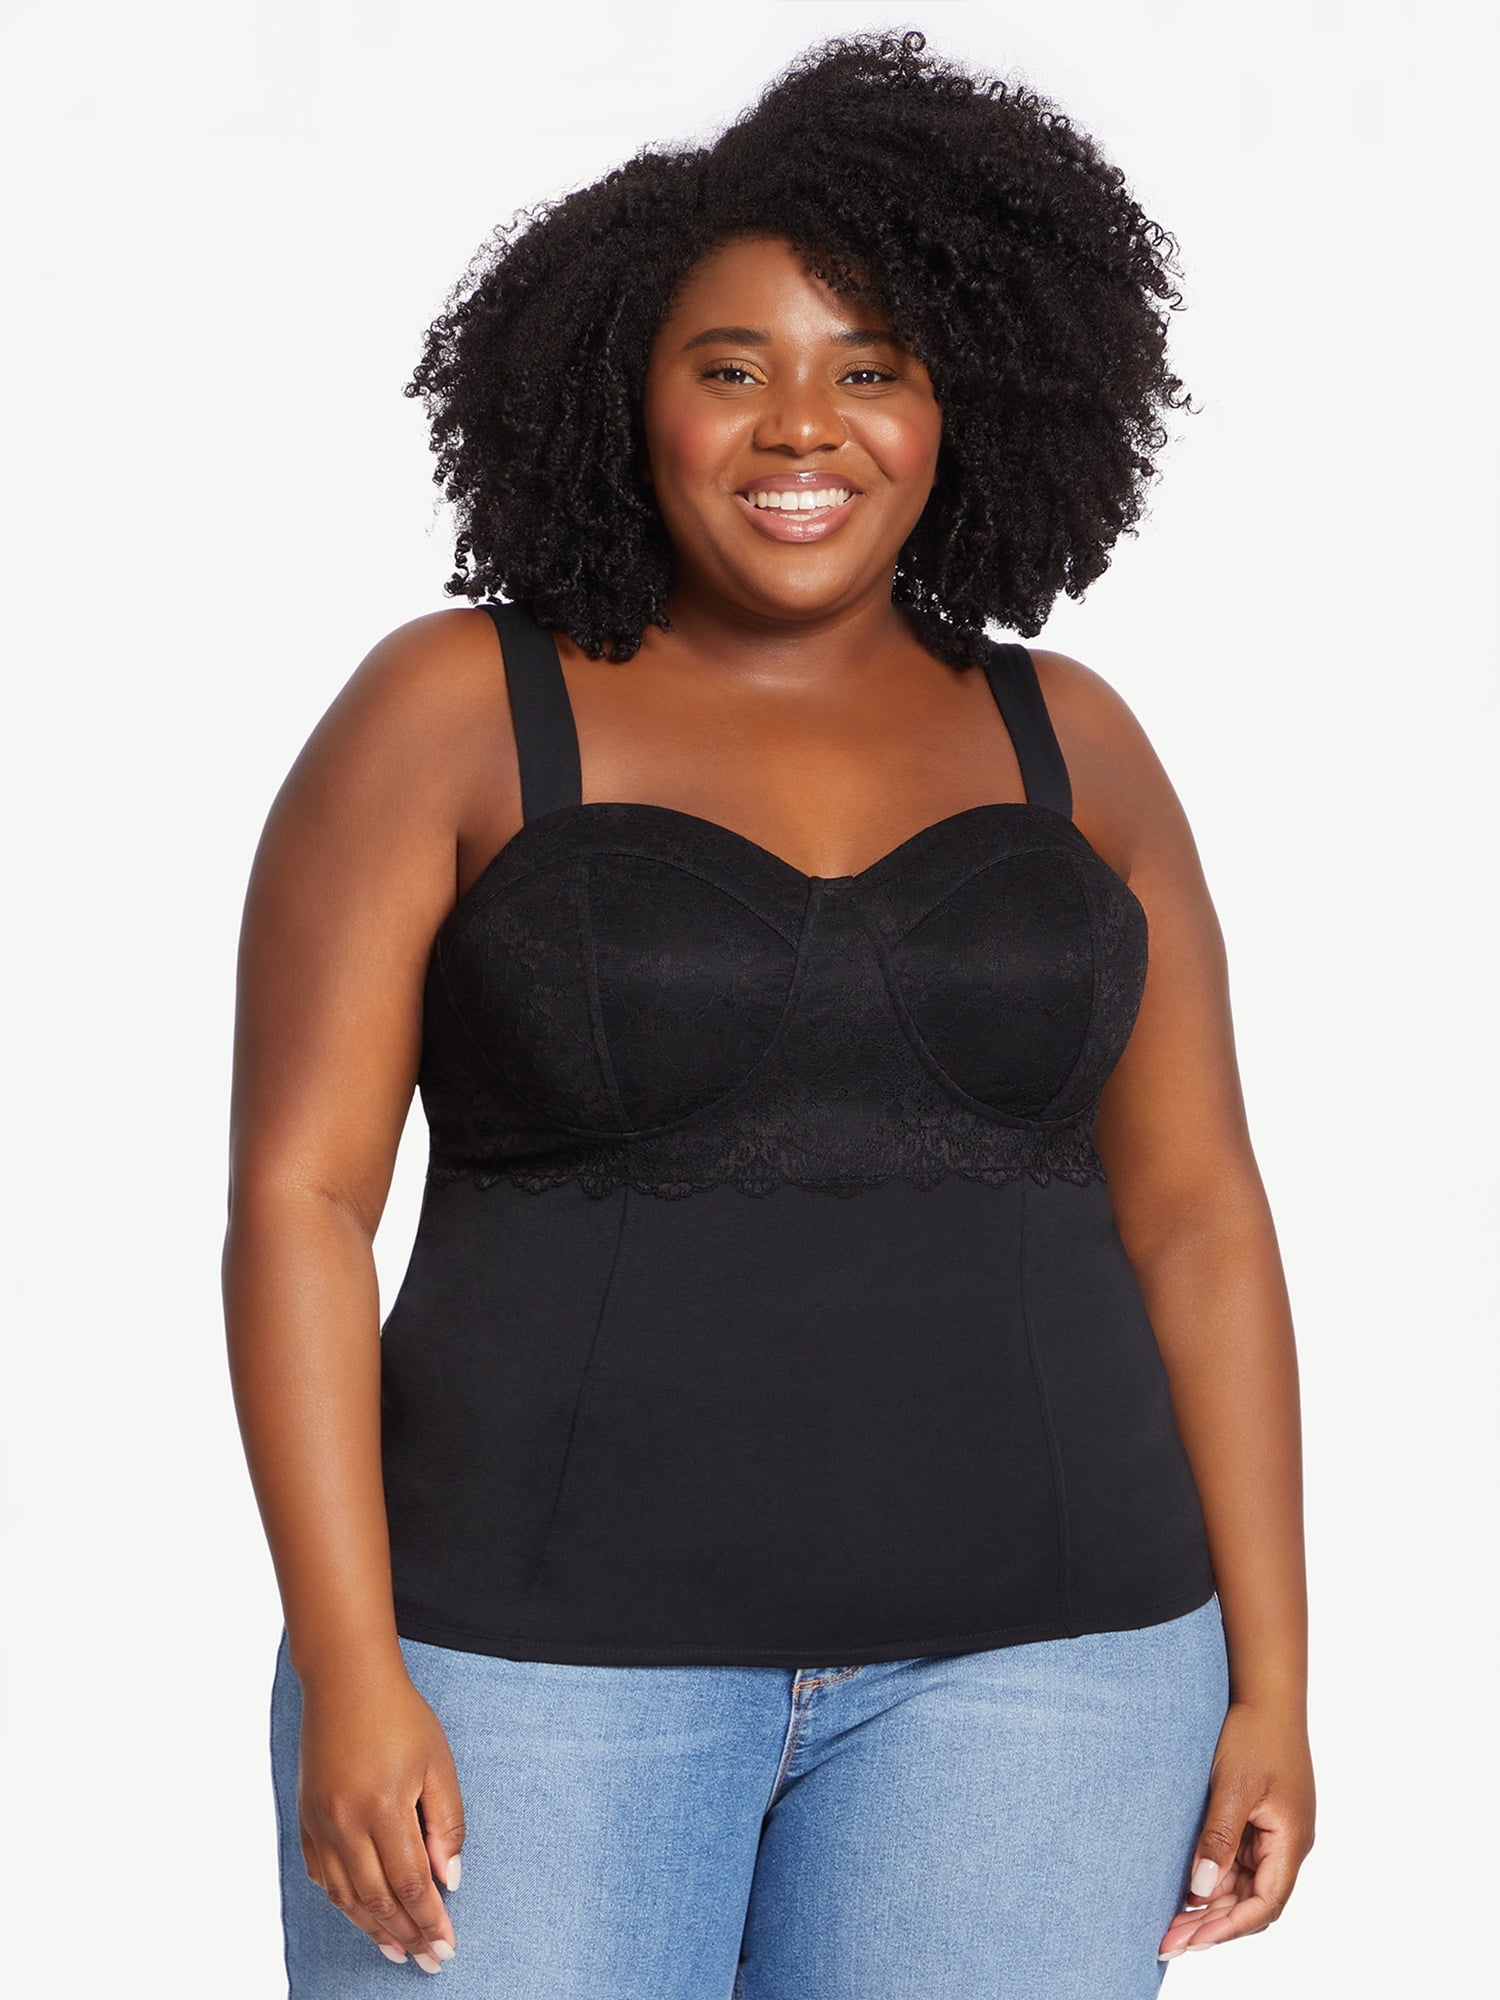 Sofia Jeans by Sofia Vergara Plus Size Bustier Top with Lace